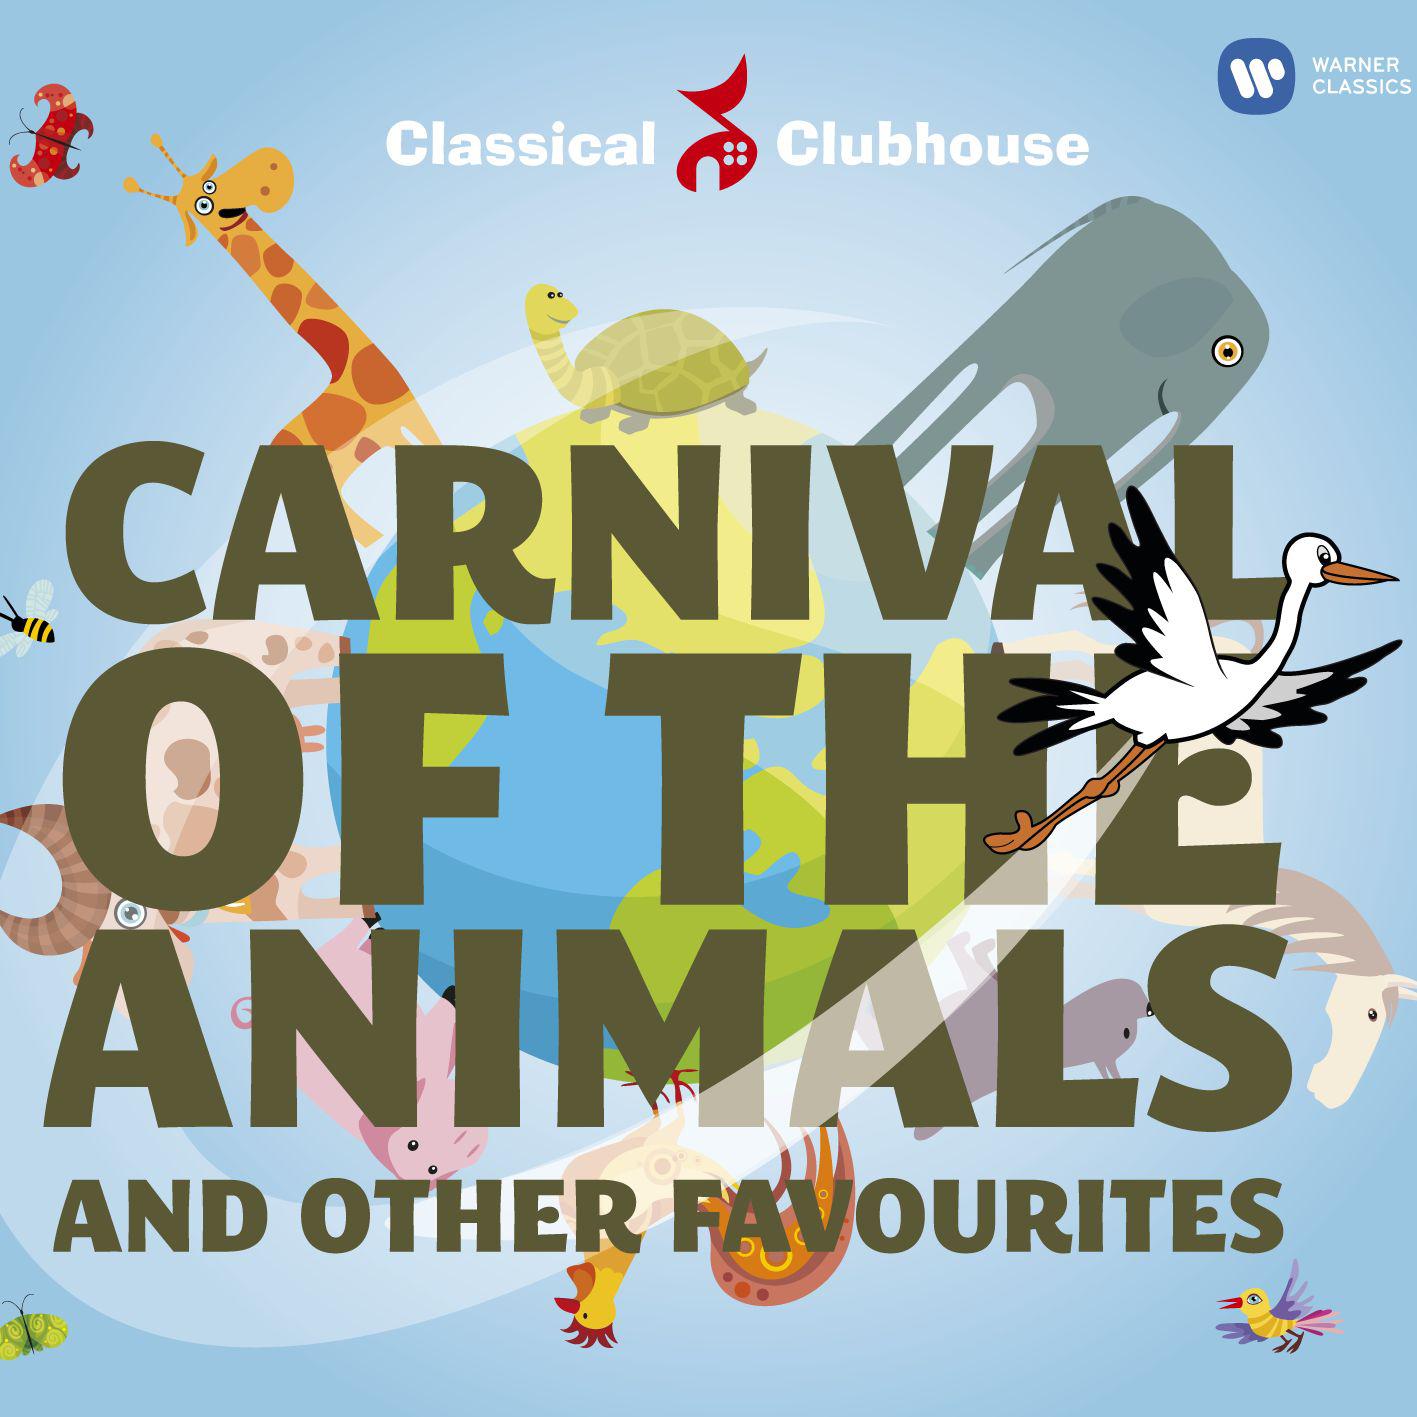 Le Carnaval des animaux:XII. Fossiles